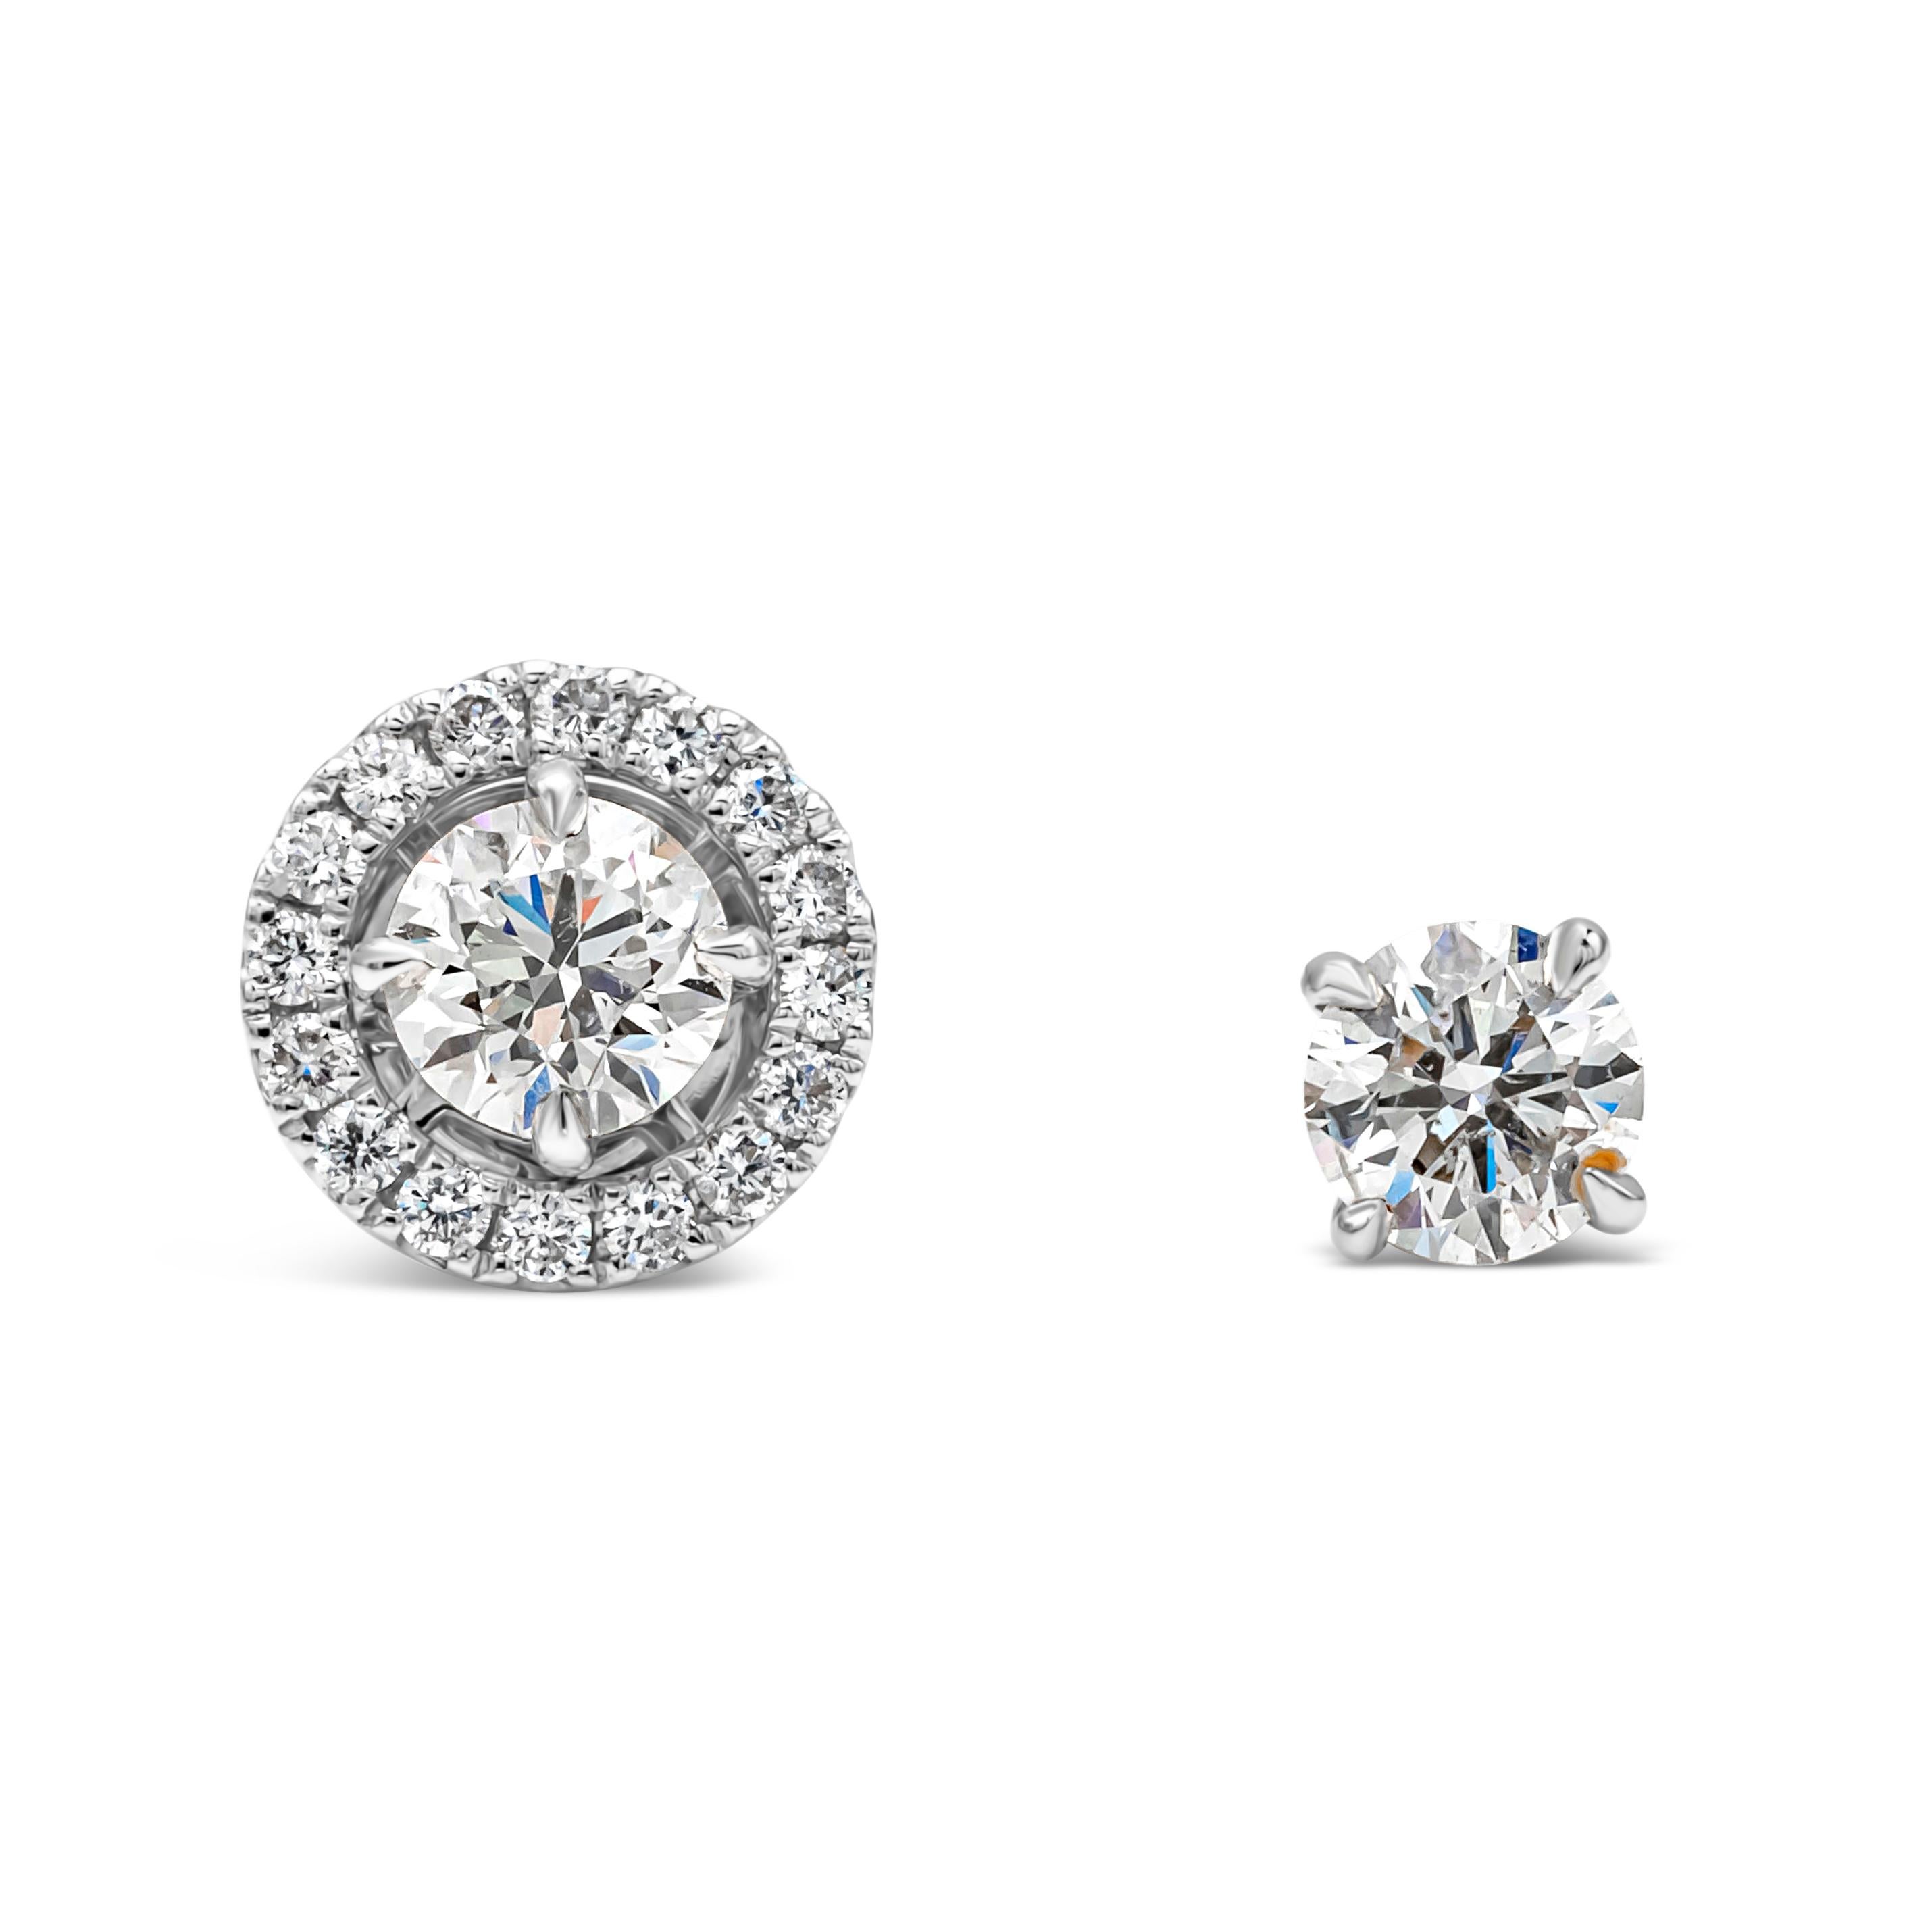 A simple and versatile pair of stud earrings showcasing 1.20 carats total brilliant round cut diamond, surrounded by a single row of brilliant round diamonds, in a halo design, the jacket of the center stone can be removable. Beautifully set in a